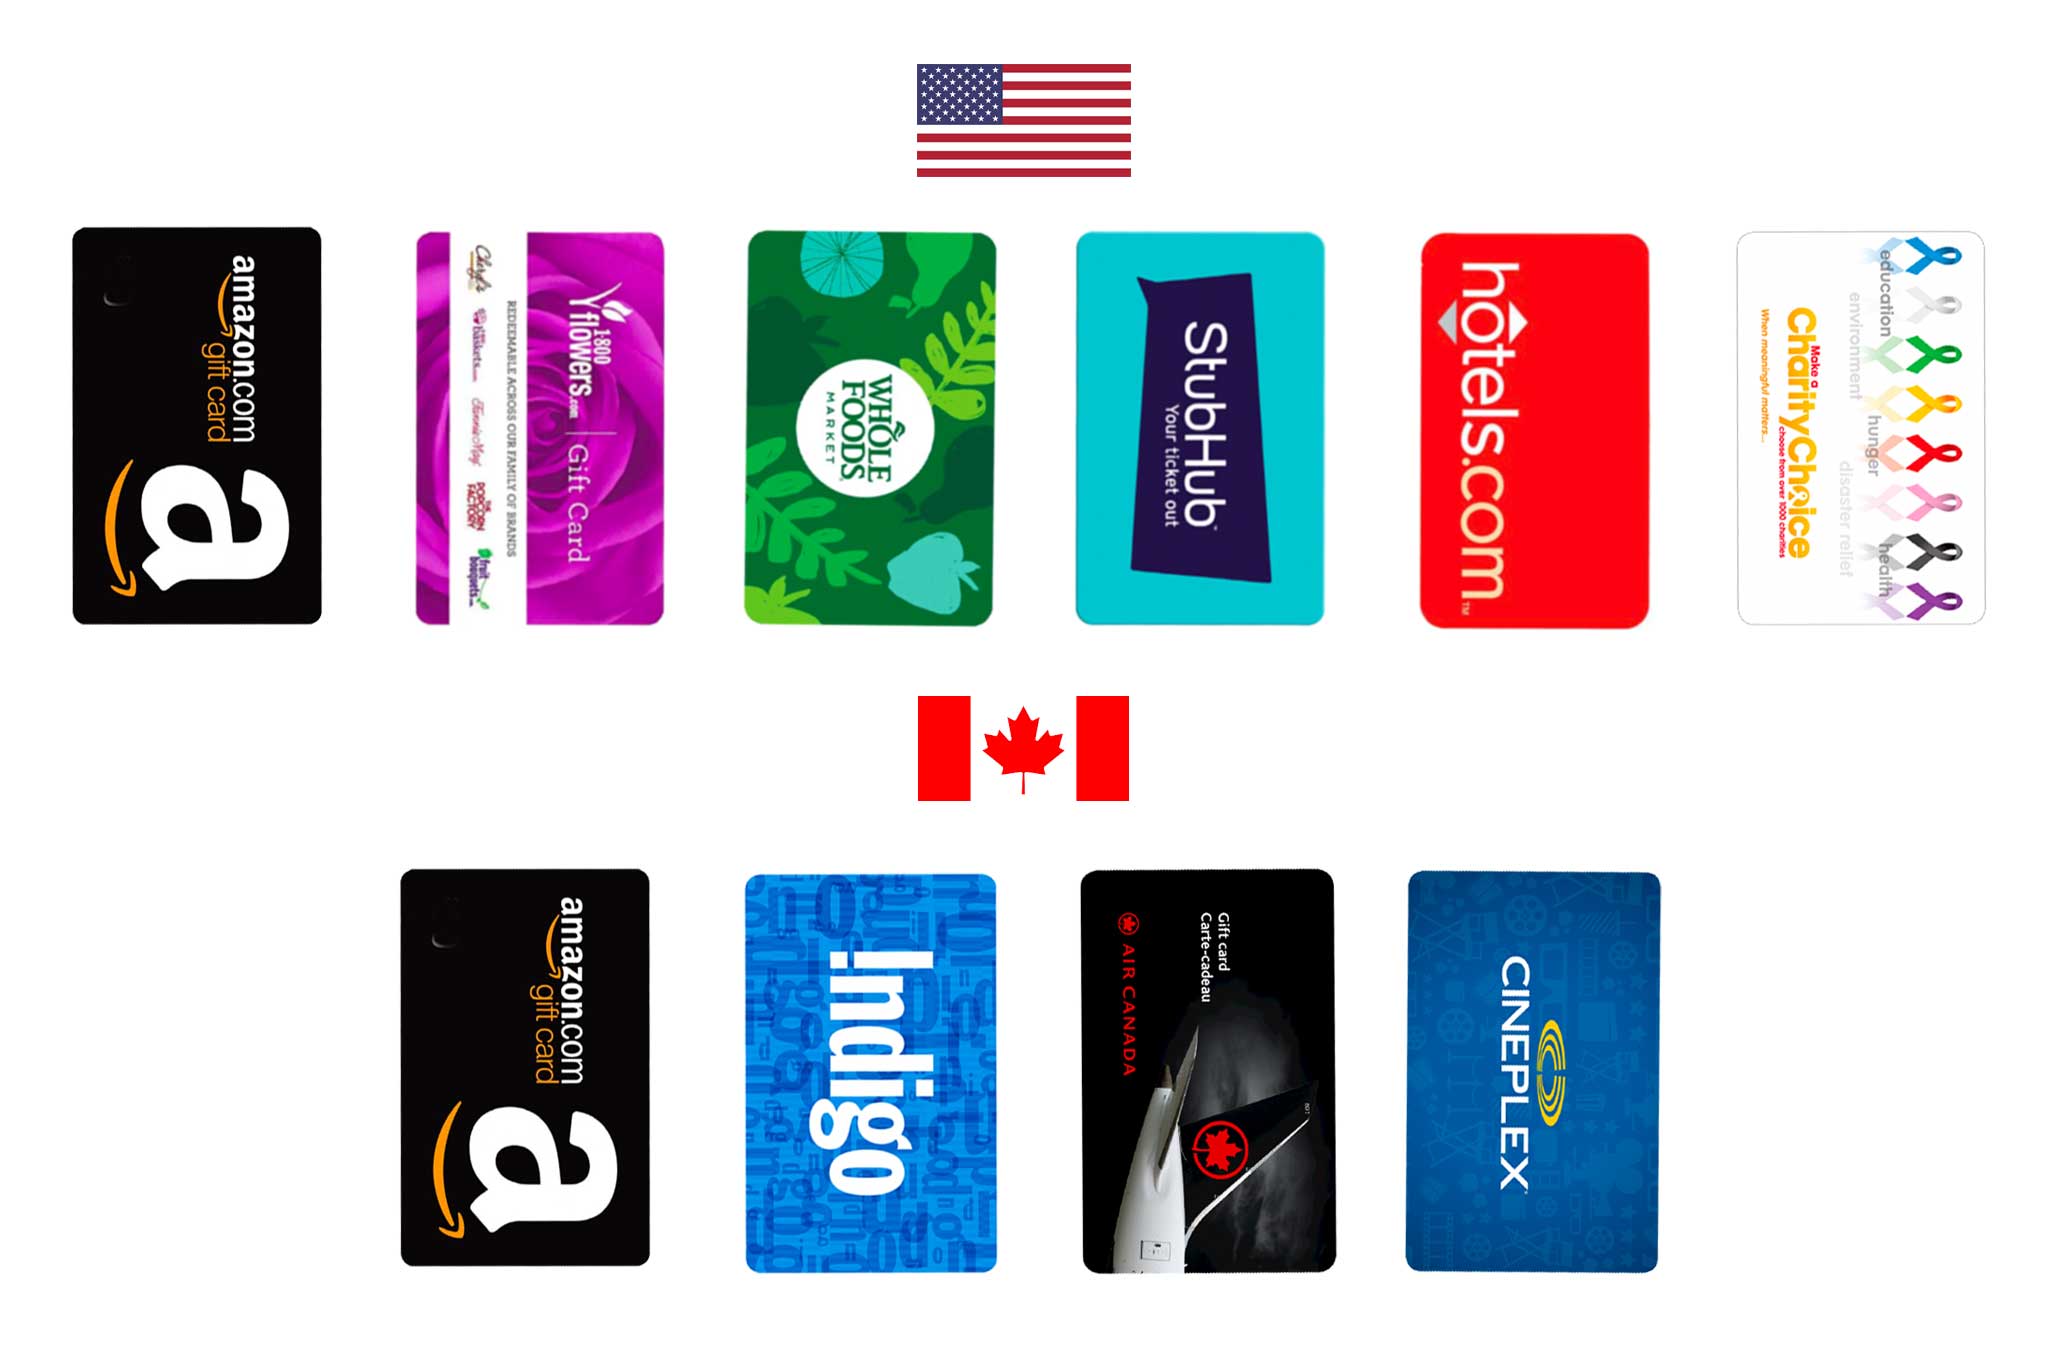 USA flag with rewards cards underneath and then a Canadian flag with rewards cards